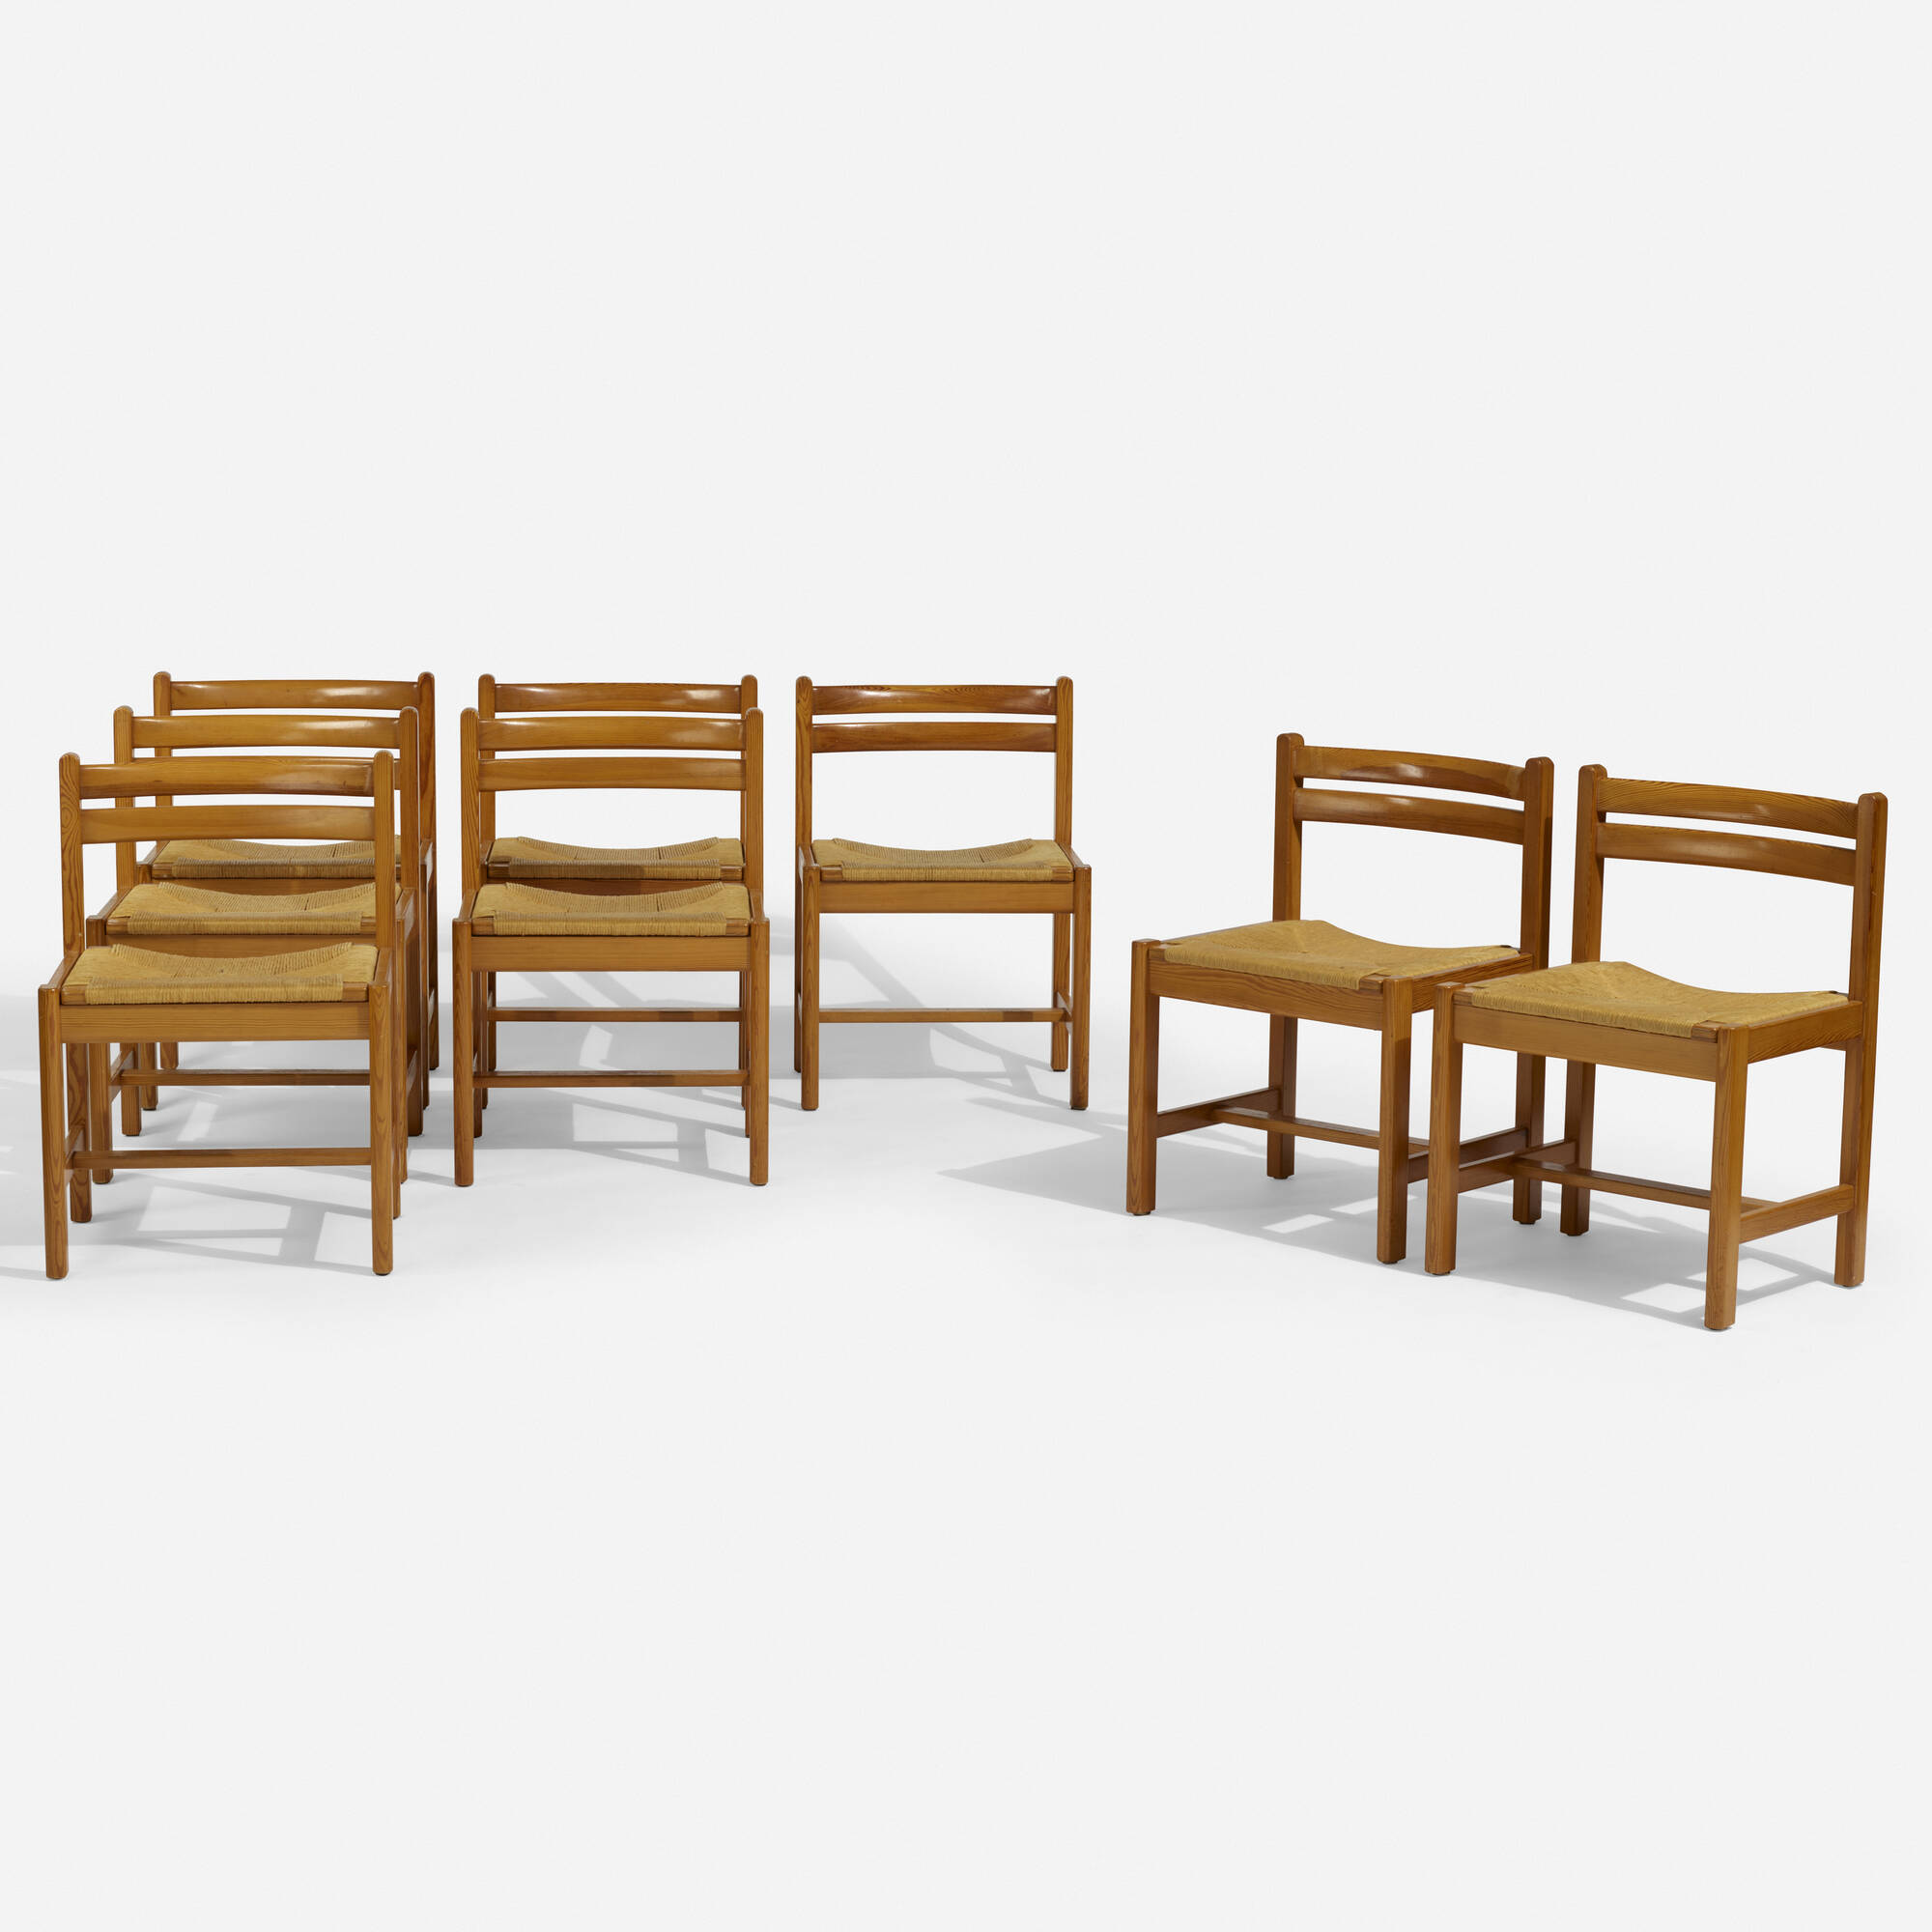 223 Borge Mogensen Asserbo Dining Chairs Set Of Eight Scandinavian Design 16 July 2020 Auctions Wright Auctions Of Art And Design